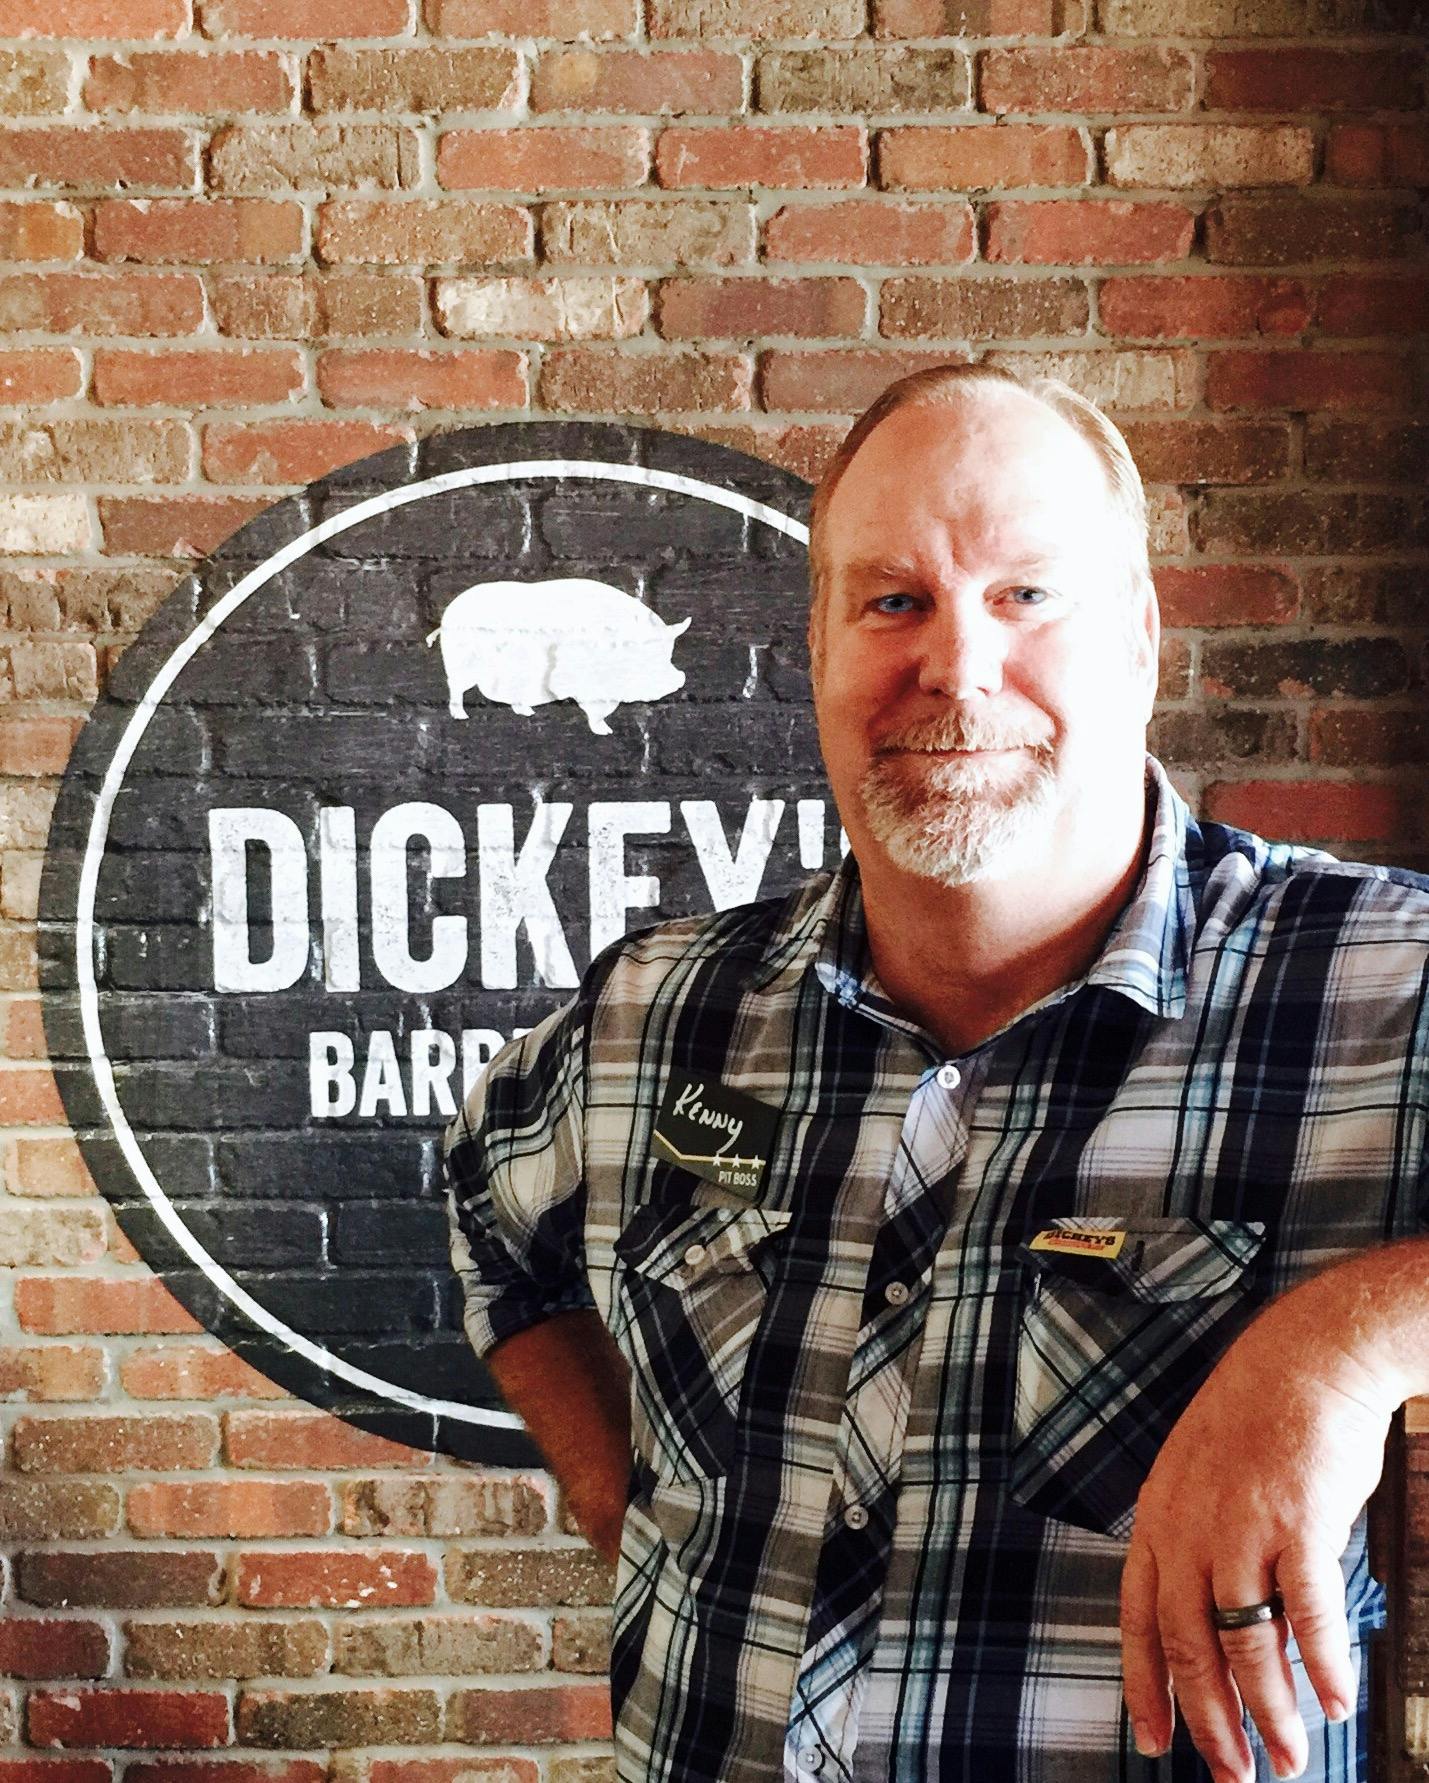 Dickey’s Barbecue Pit Brings a New Fast Casual Barbecue Option to New Braunfels